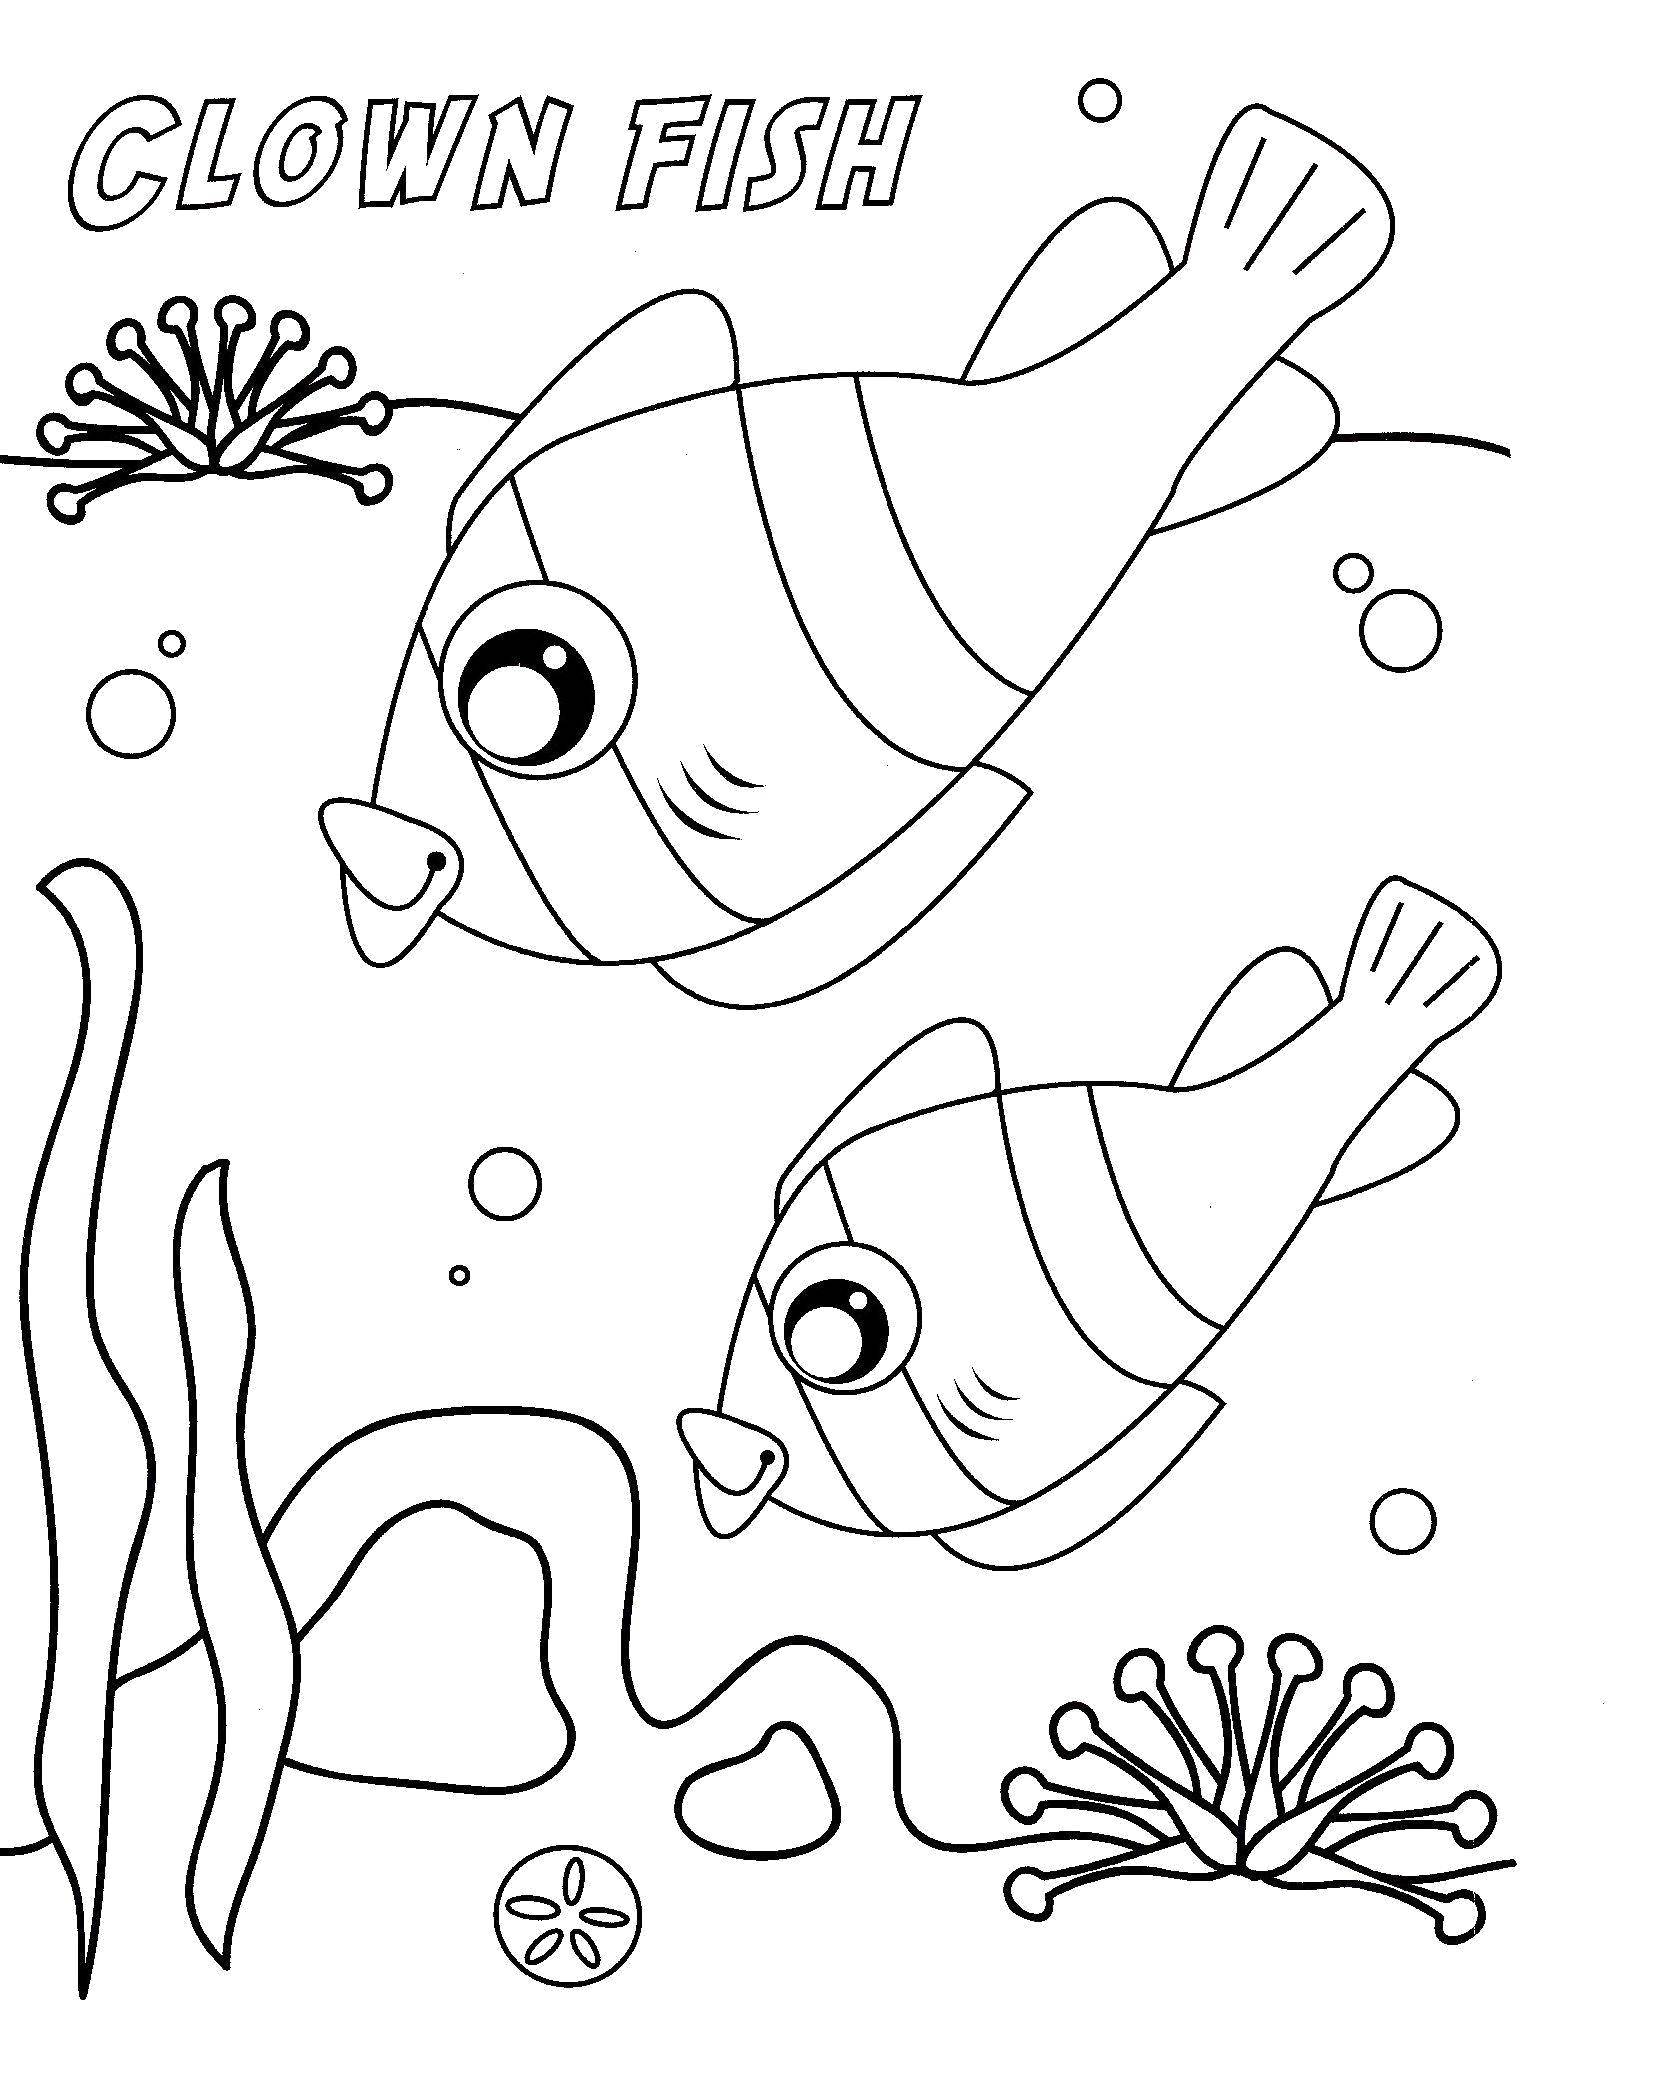 Coloring Clown fish. Category Marine animals. Tags:  Underwater world, fish.